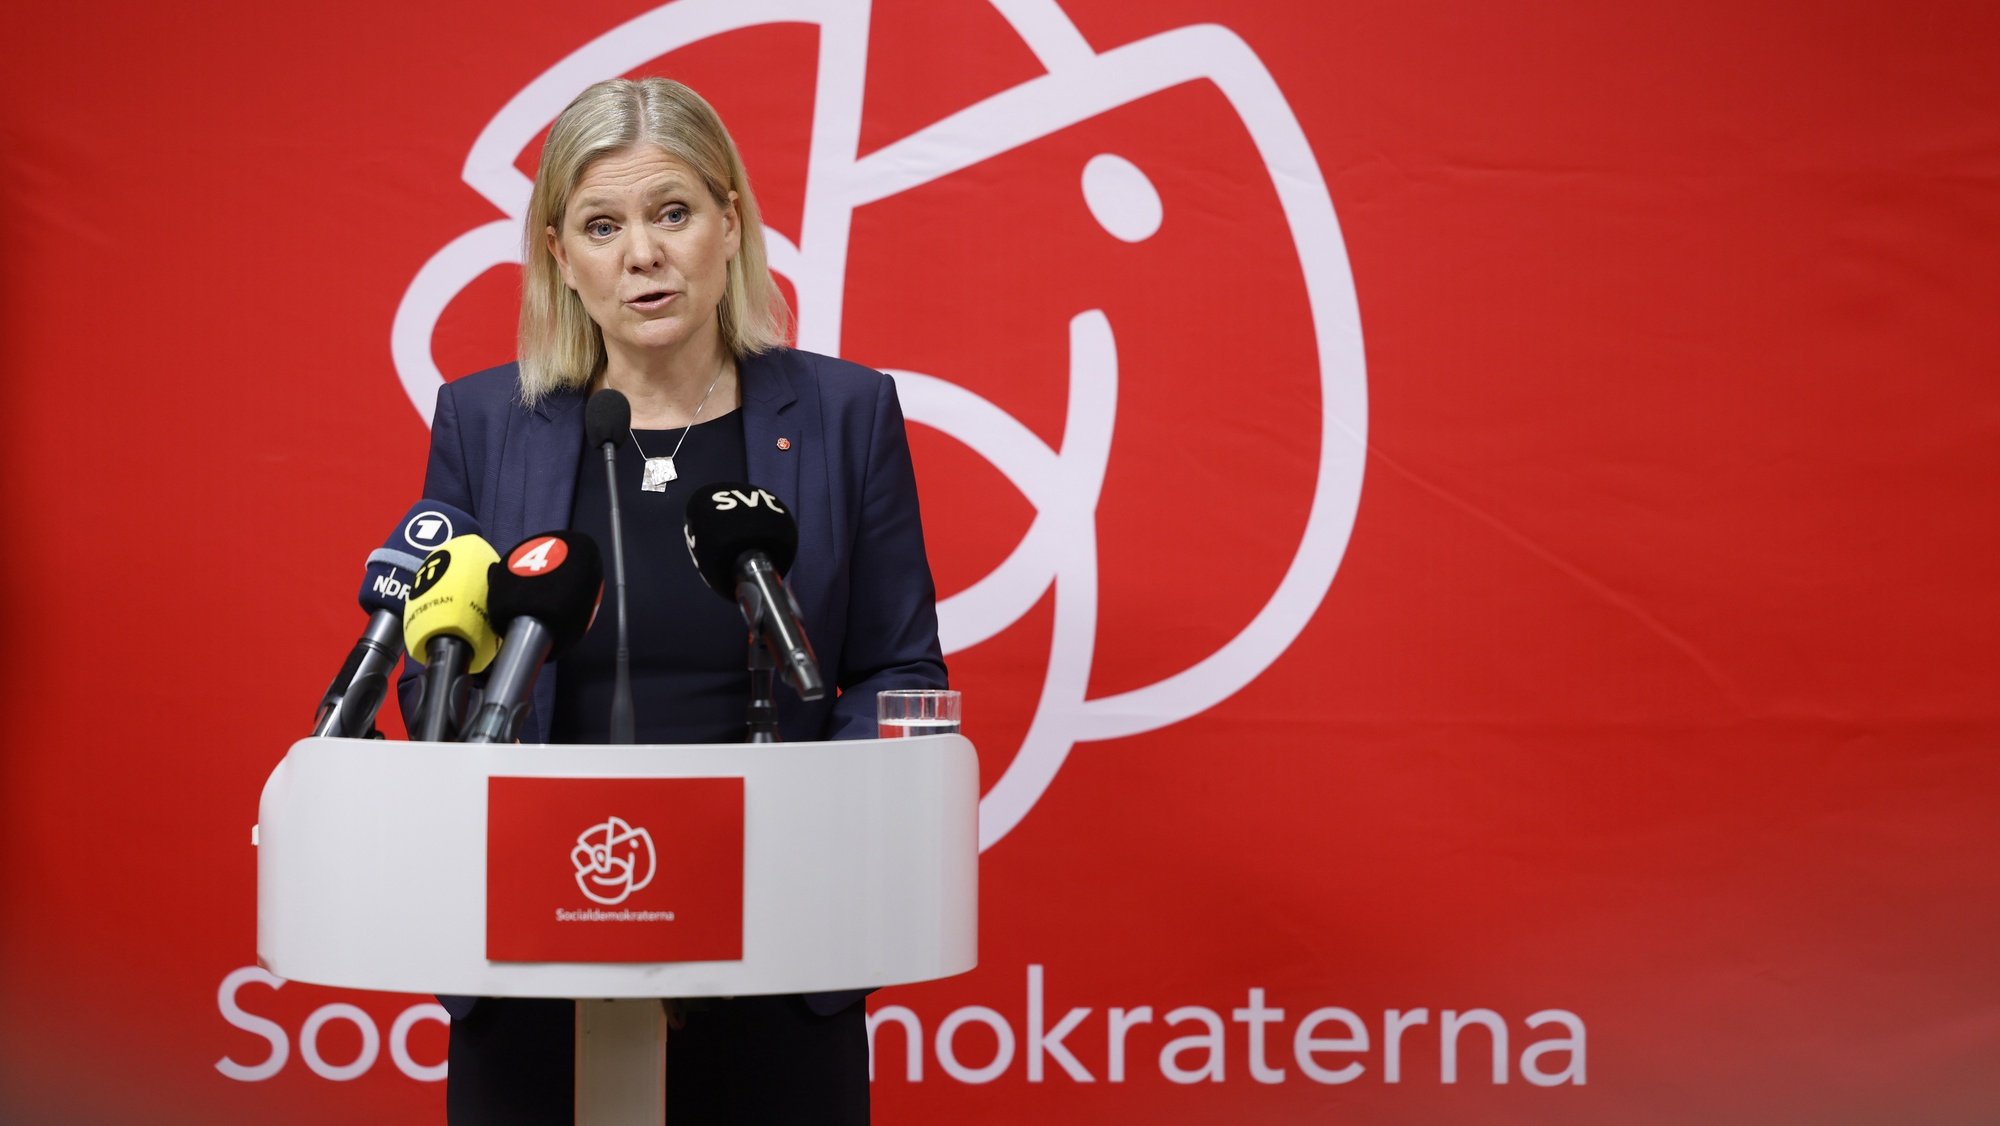 epa09949219 Sweden&#039;s Prime Minister Magdalena Andersson gives a press conference after a meeting at the ruling Social Democrat&#039;s headquarters in Stockholm, Sweden, 15 May 2022. The Swedish governing party, the Social Democrats, has decideded to support a Swedish NATO application.  EPA/Fredrik Persson  SWEDEN OUT